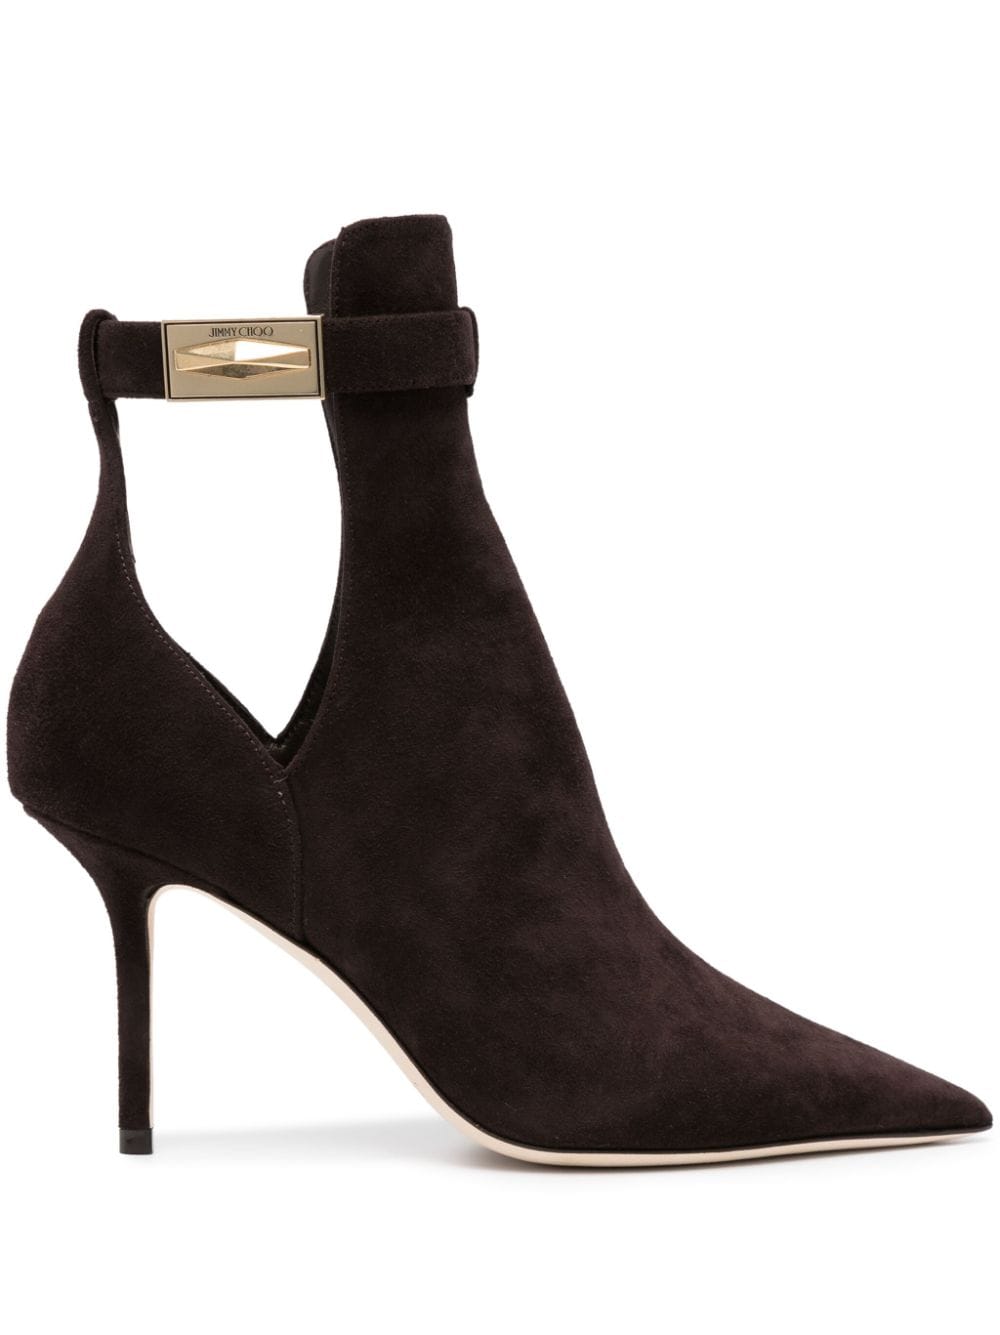 Jimmy Choo Nell 85 suede ankle boots - Brown von Jimmy Choo